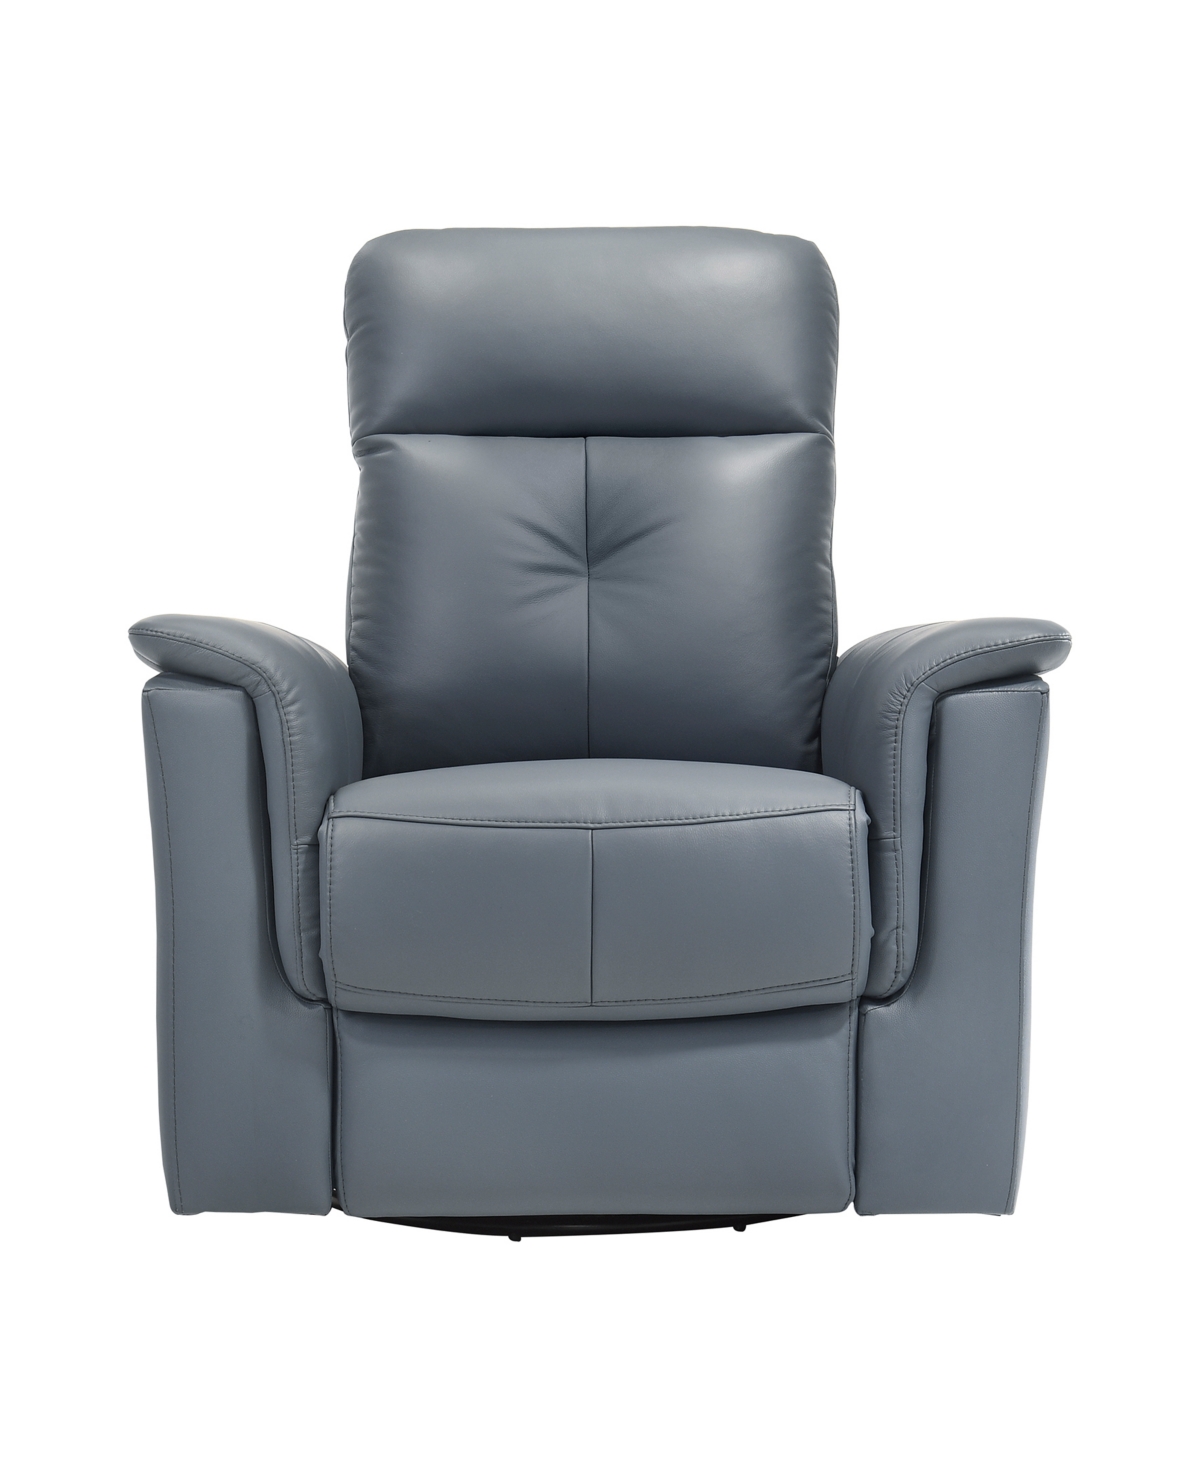 Homelegance White Label Emillia 36" Leather Swivel Glider Reclining Chair In Gray